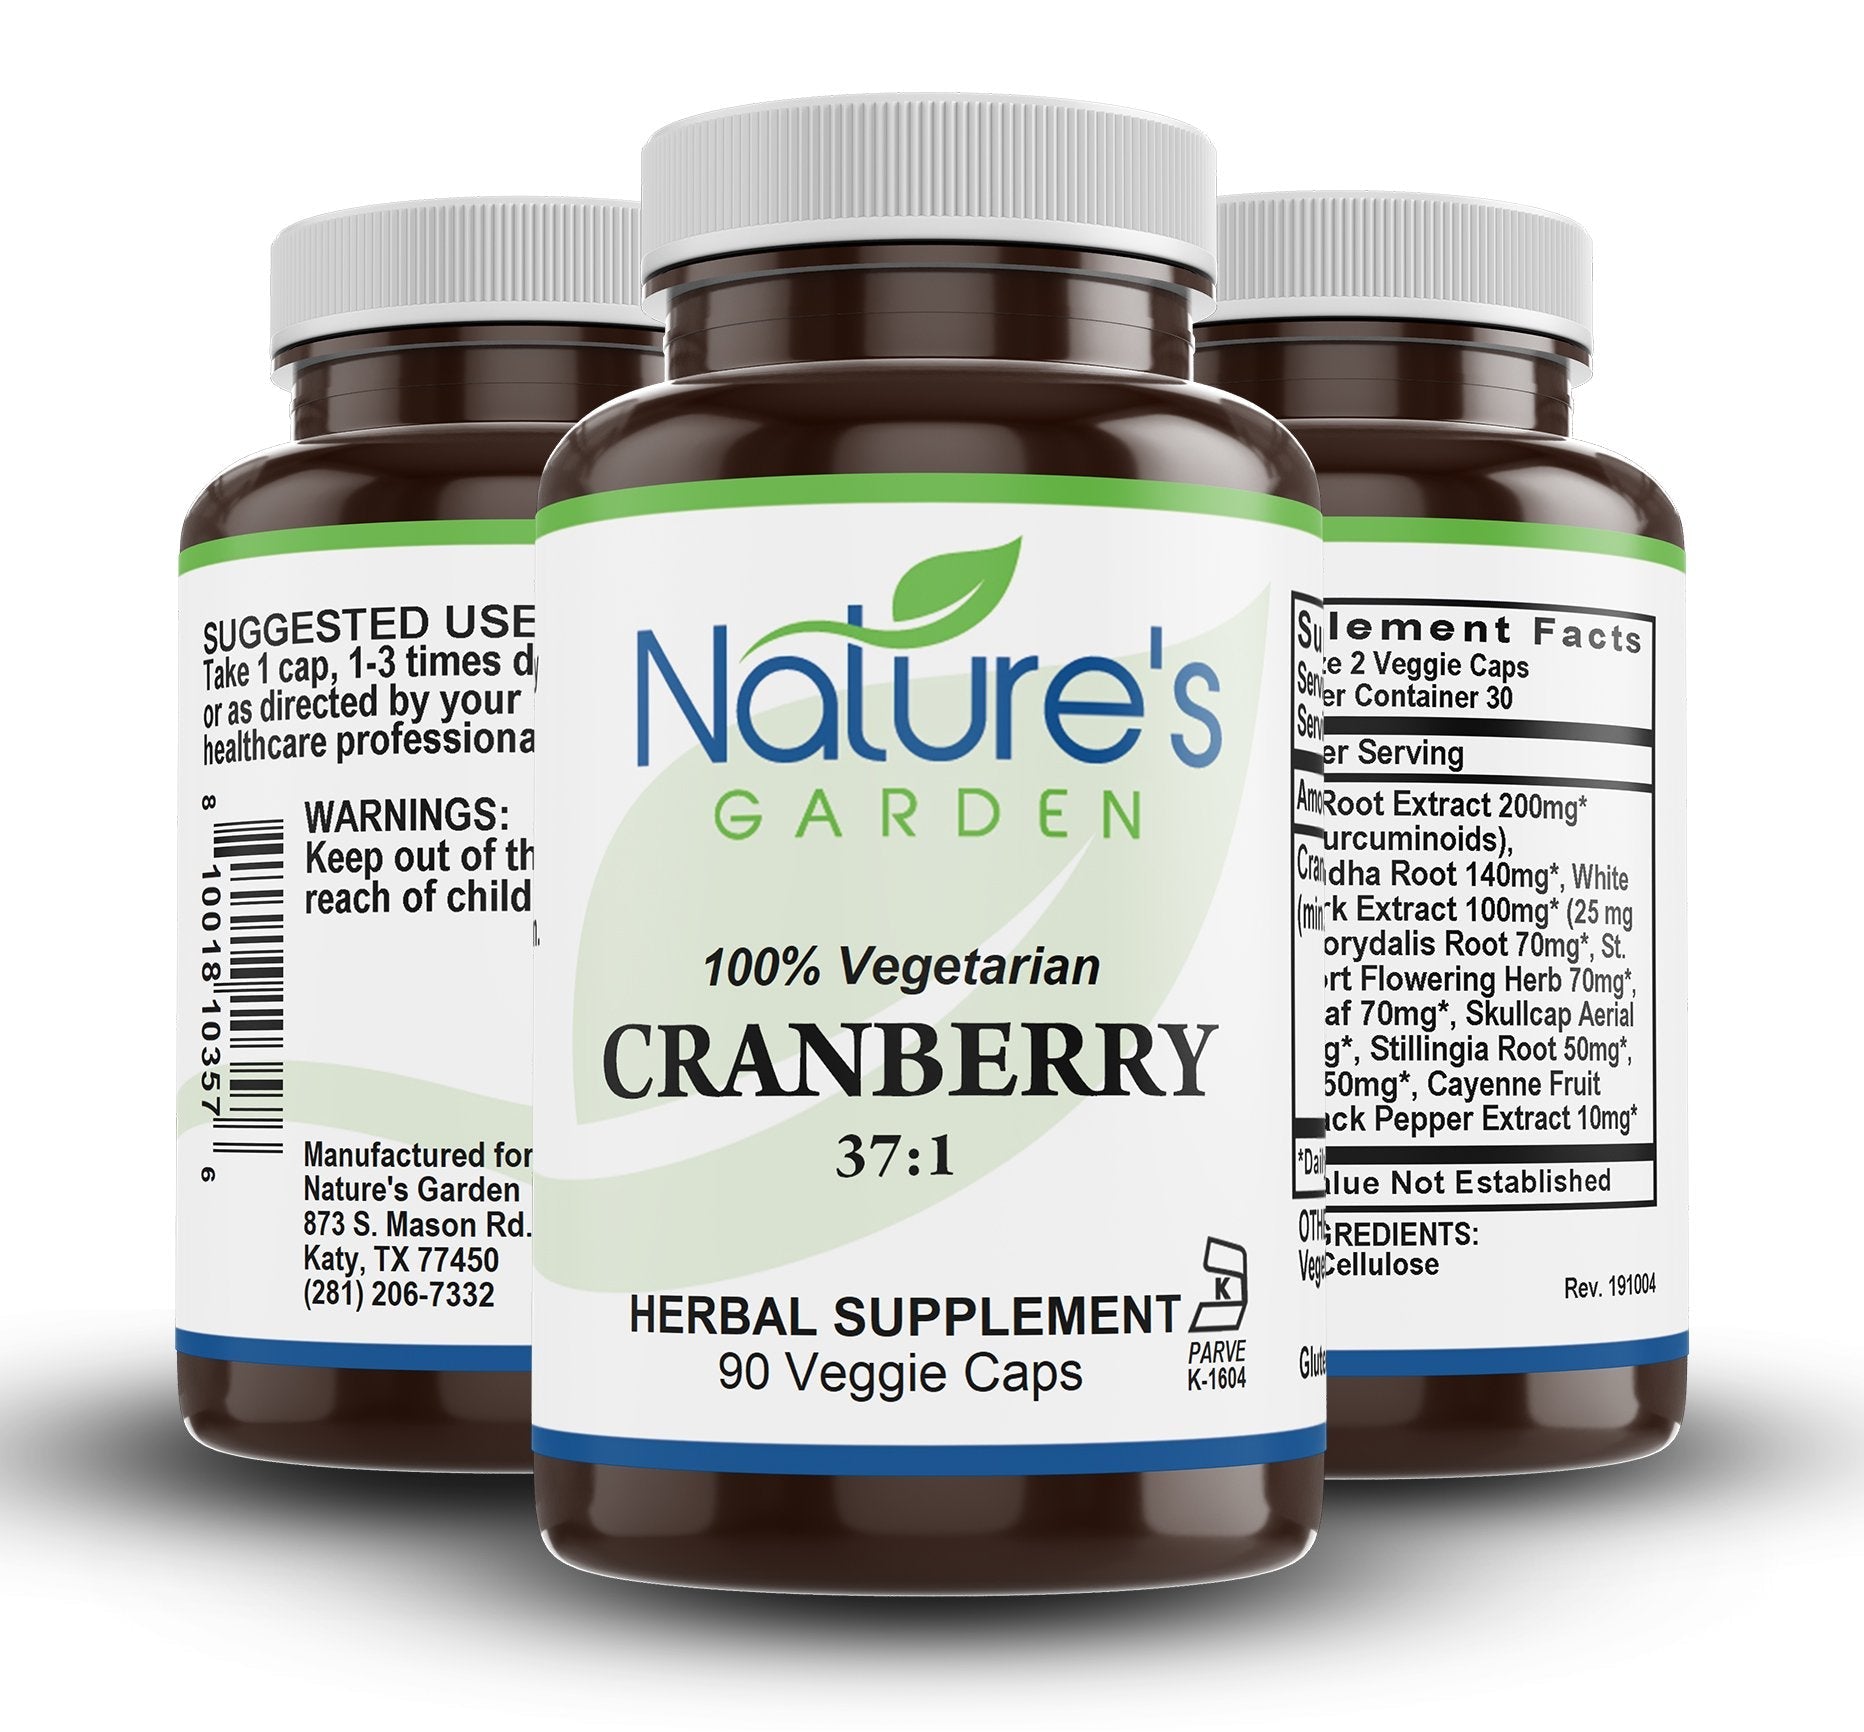 Cranberry - 90 Veggie Caps with 37:1 Cranberry Concentrate Extract